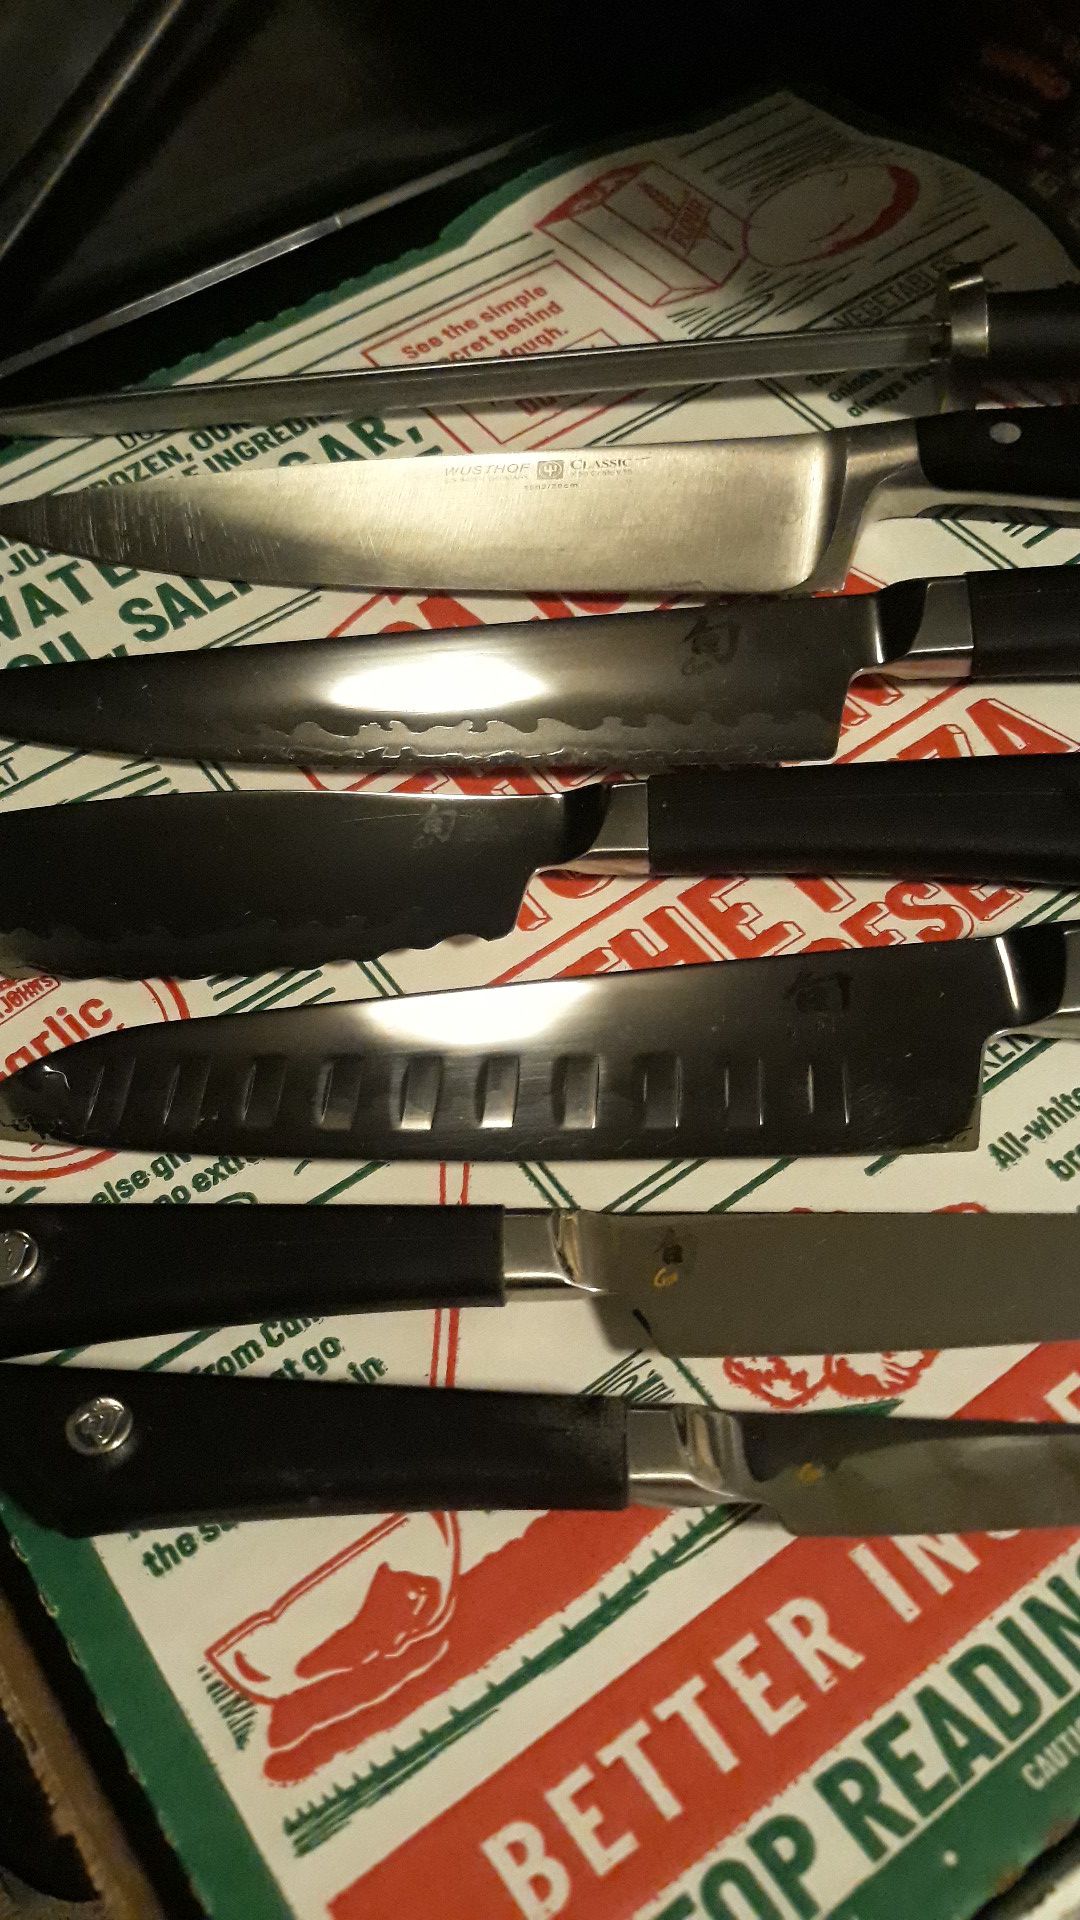 Chef knives